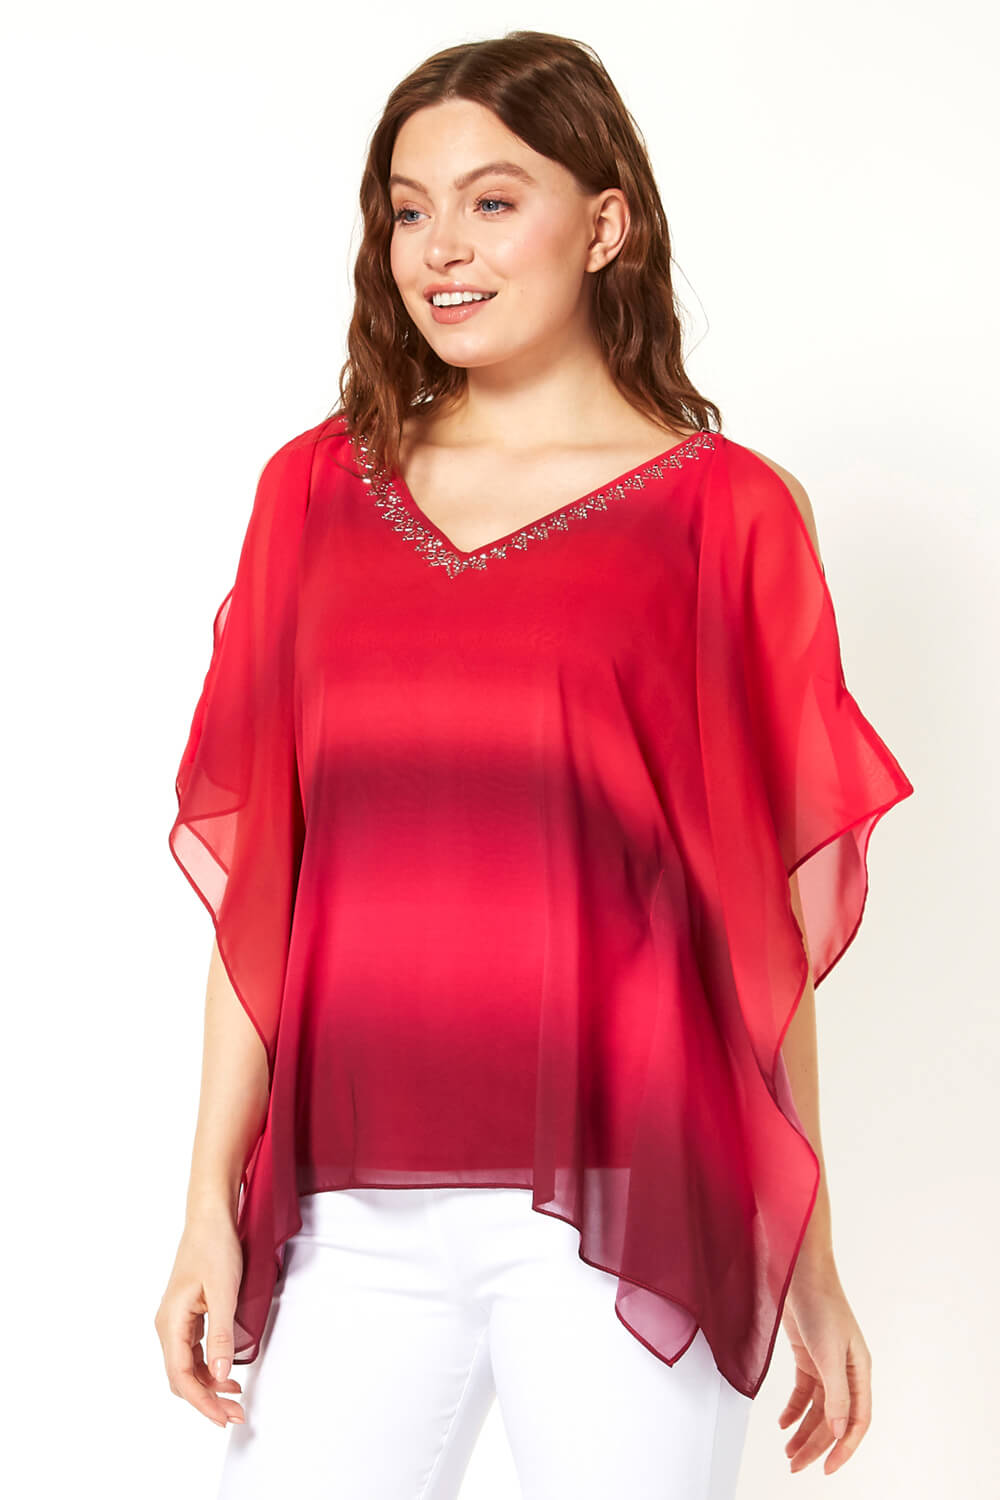 Sparkle Embellished Ombre Overlay Top in Fuchsia - Roman Originals UK